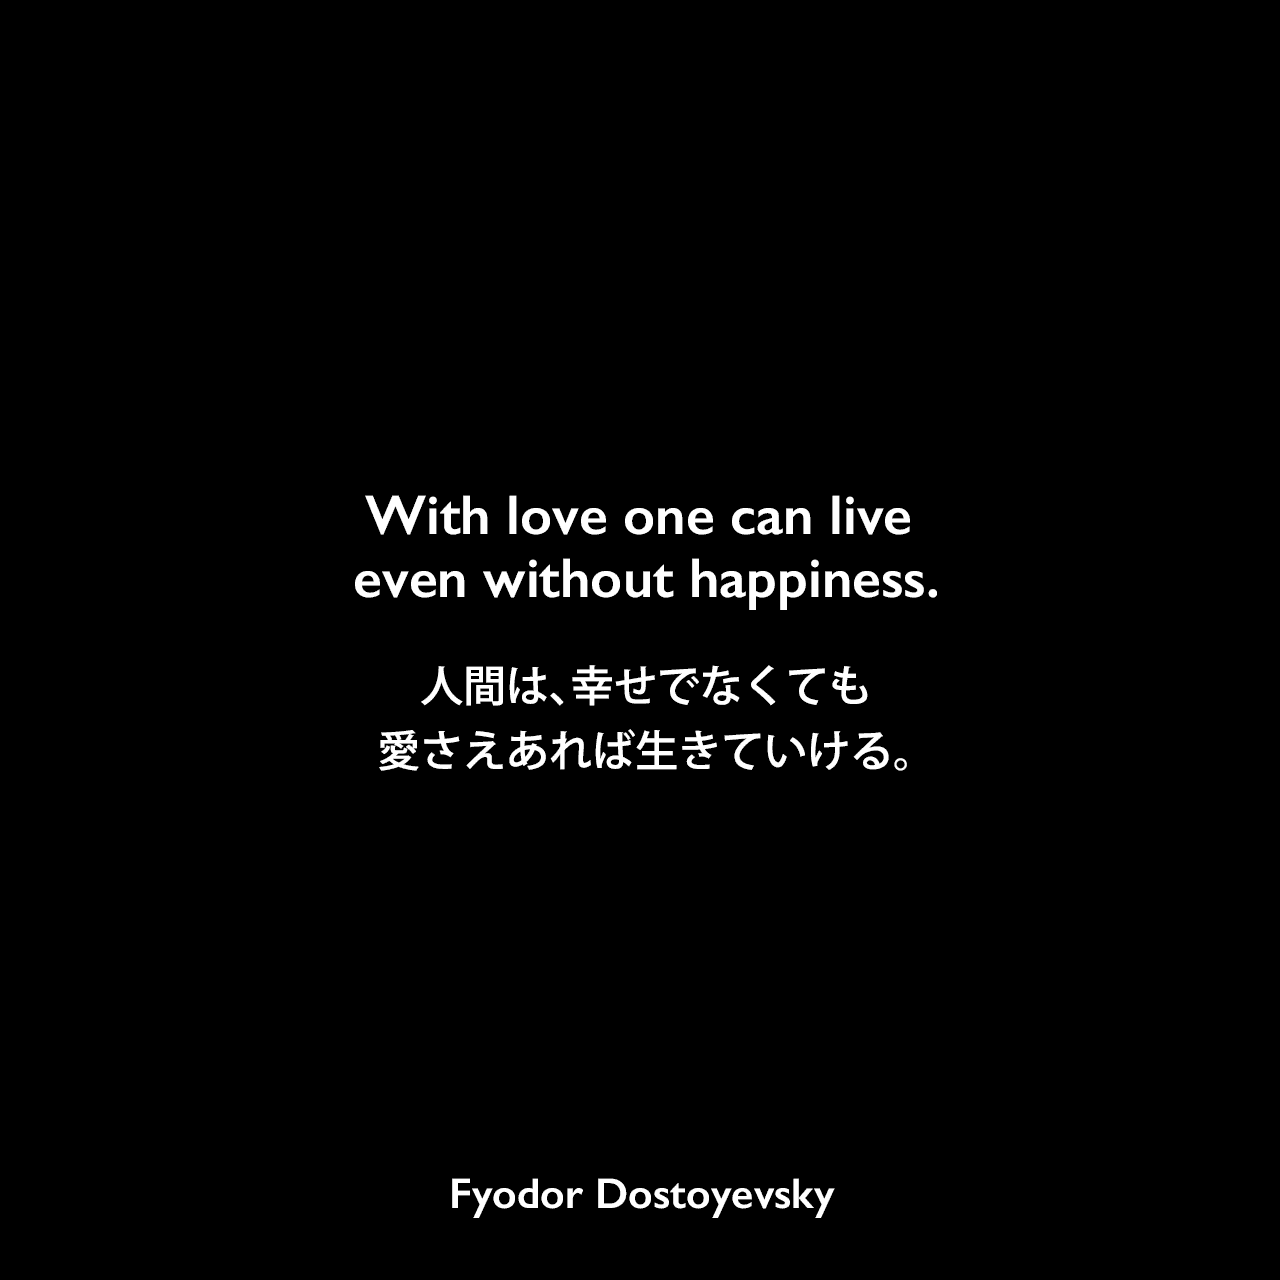 With love one can live even without happiness.人間は、幸せでなくても愛さえあれば生きていける。